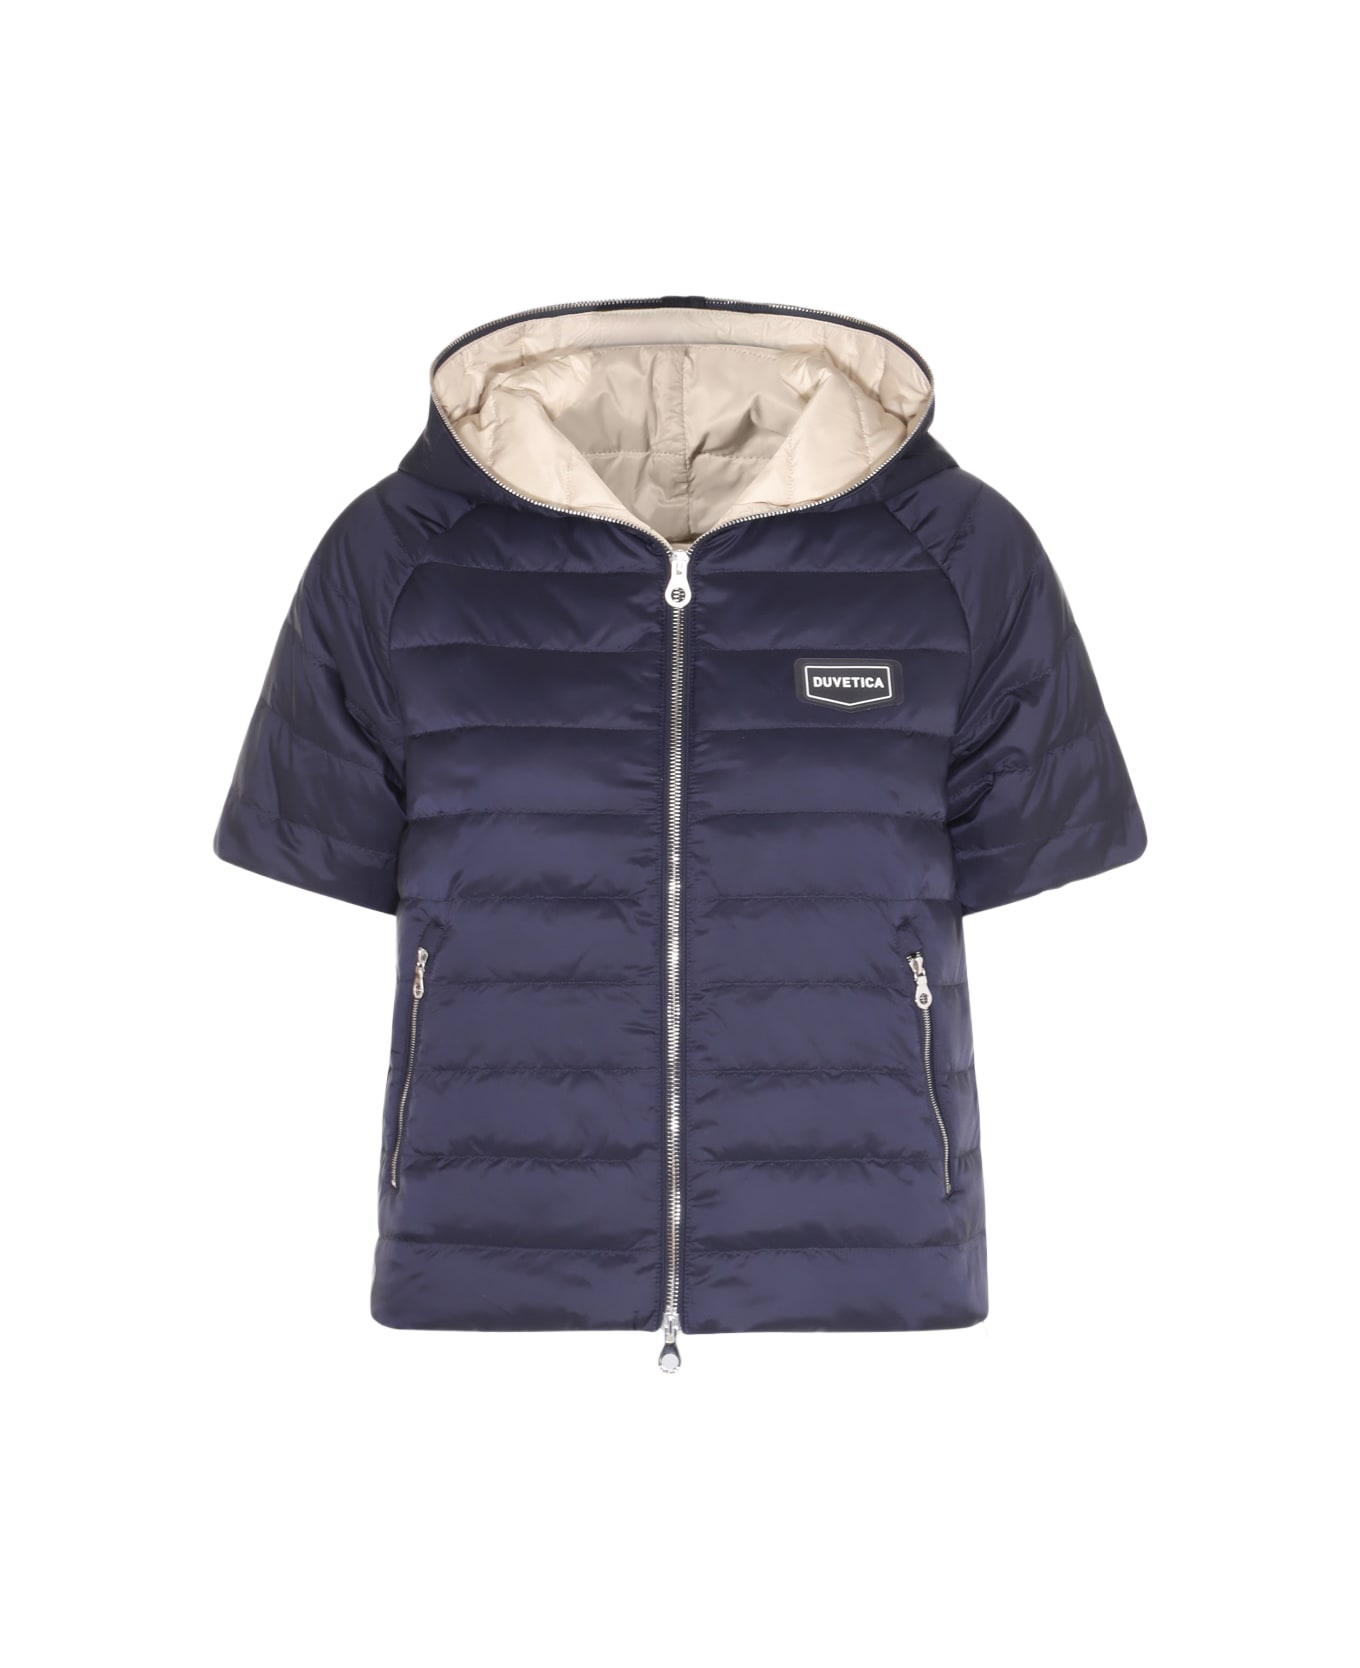 Duvetica Navy Blue And Cream Down Jacket - Blue